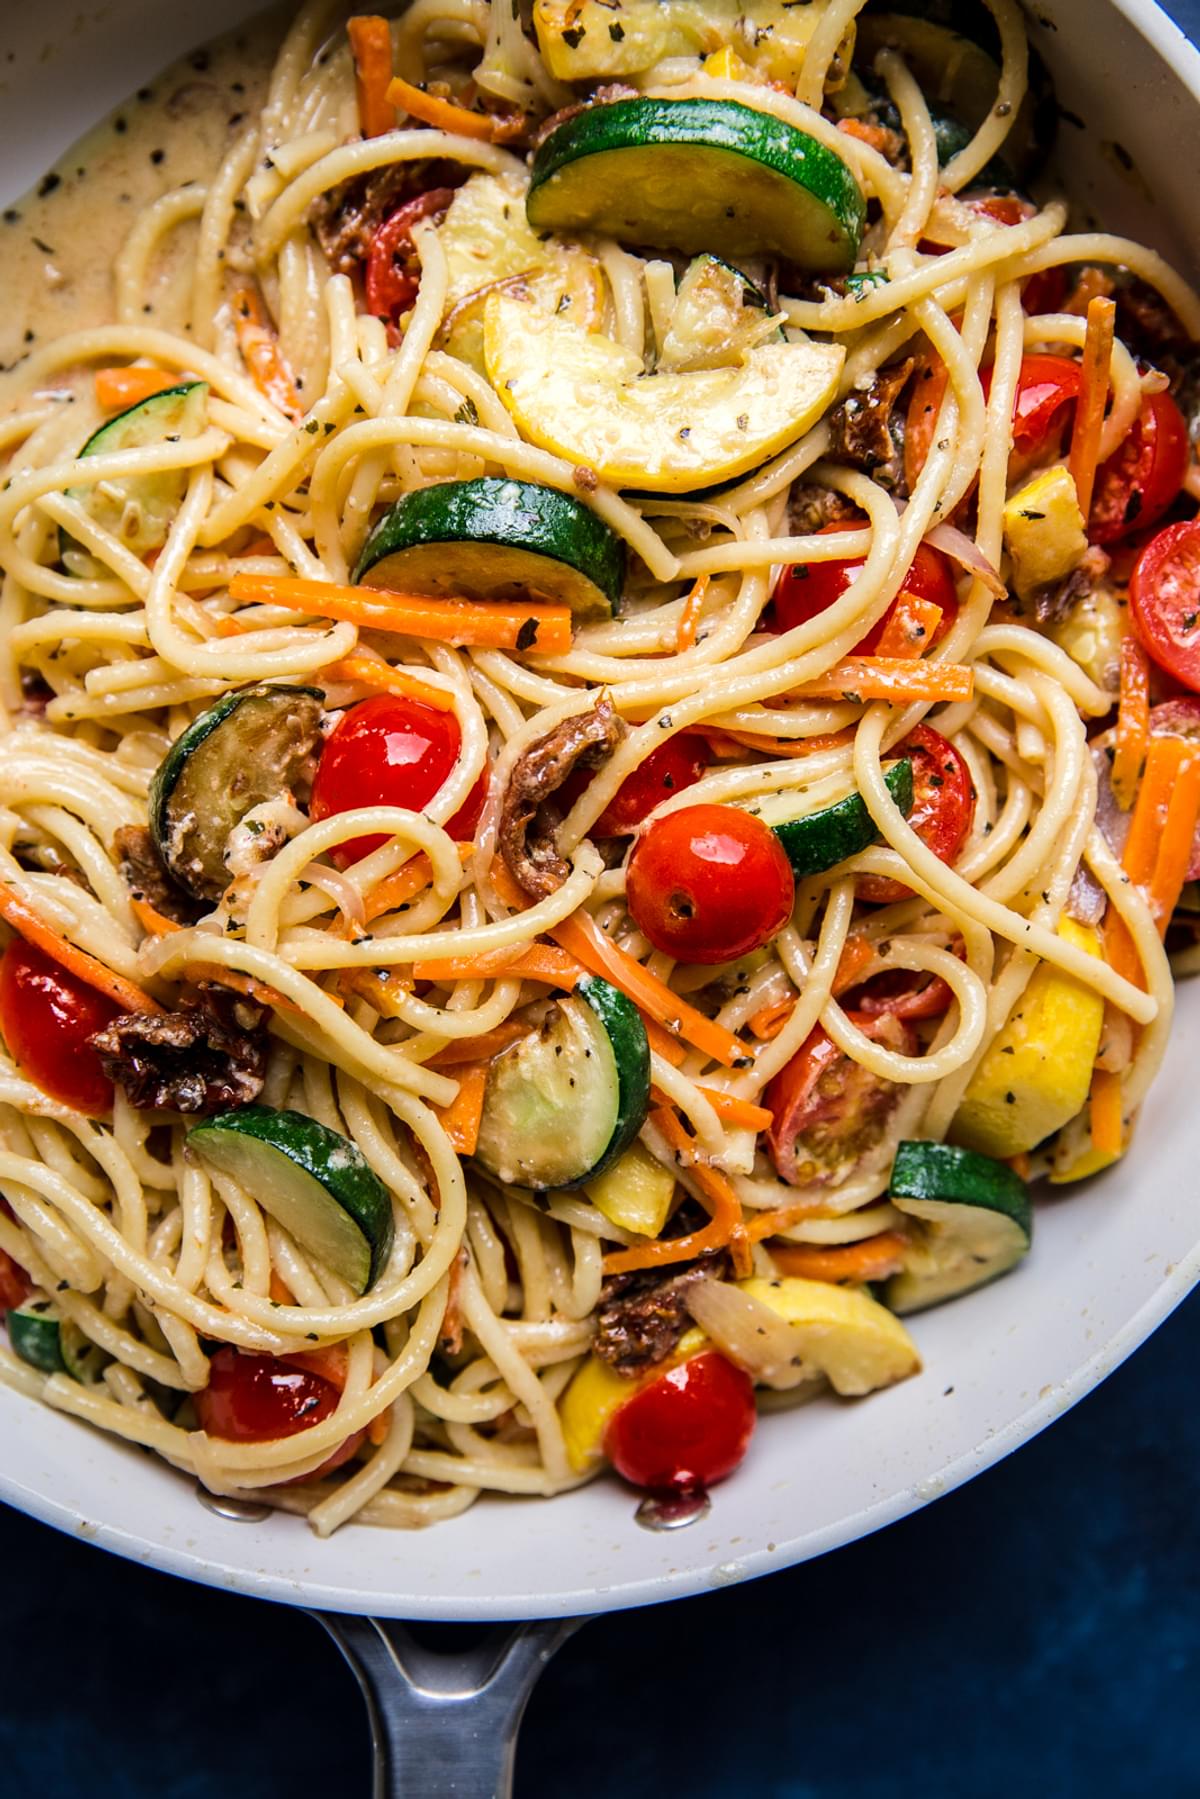 homemade pasta primavera with zucchini, carrots, tomatoes in a creamy parmesan sauce